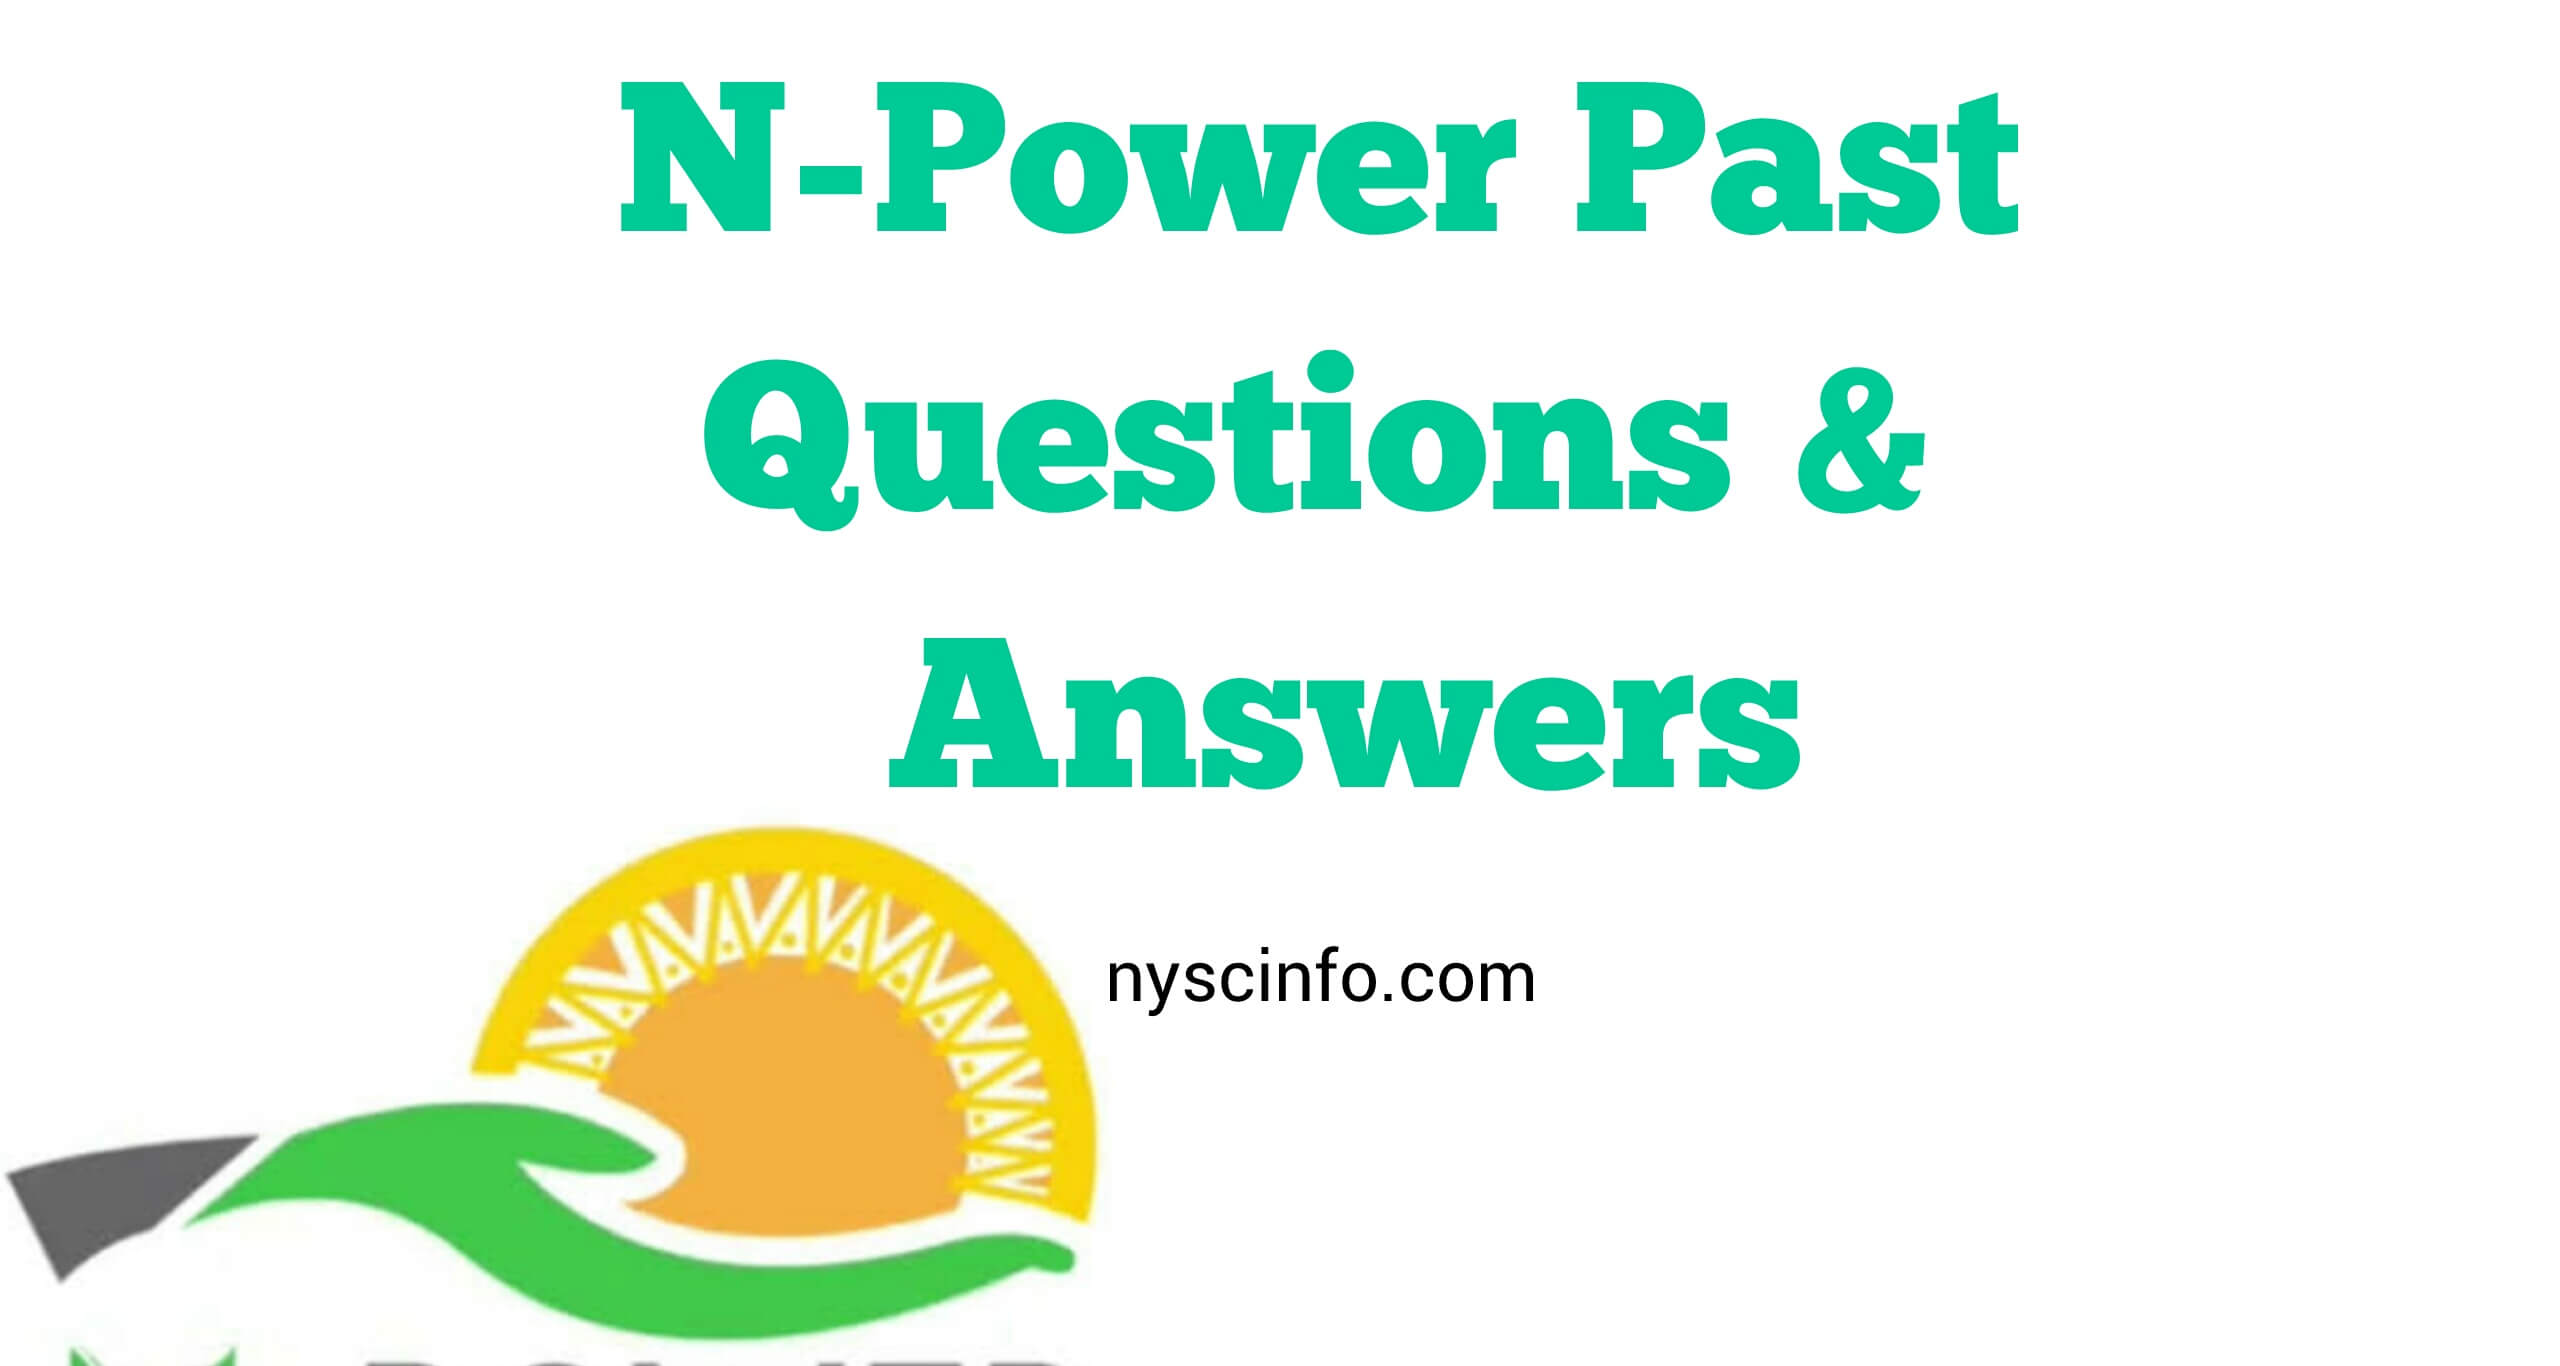 npower batch c selection test past questions answers pdf 2020 download here Npower past questions and answers